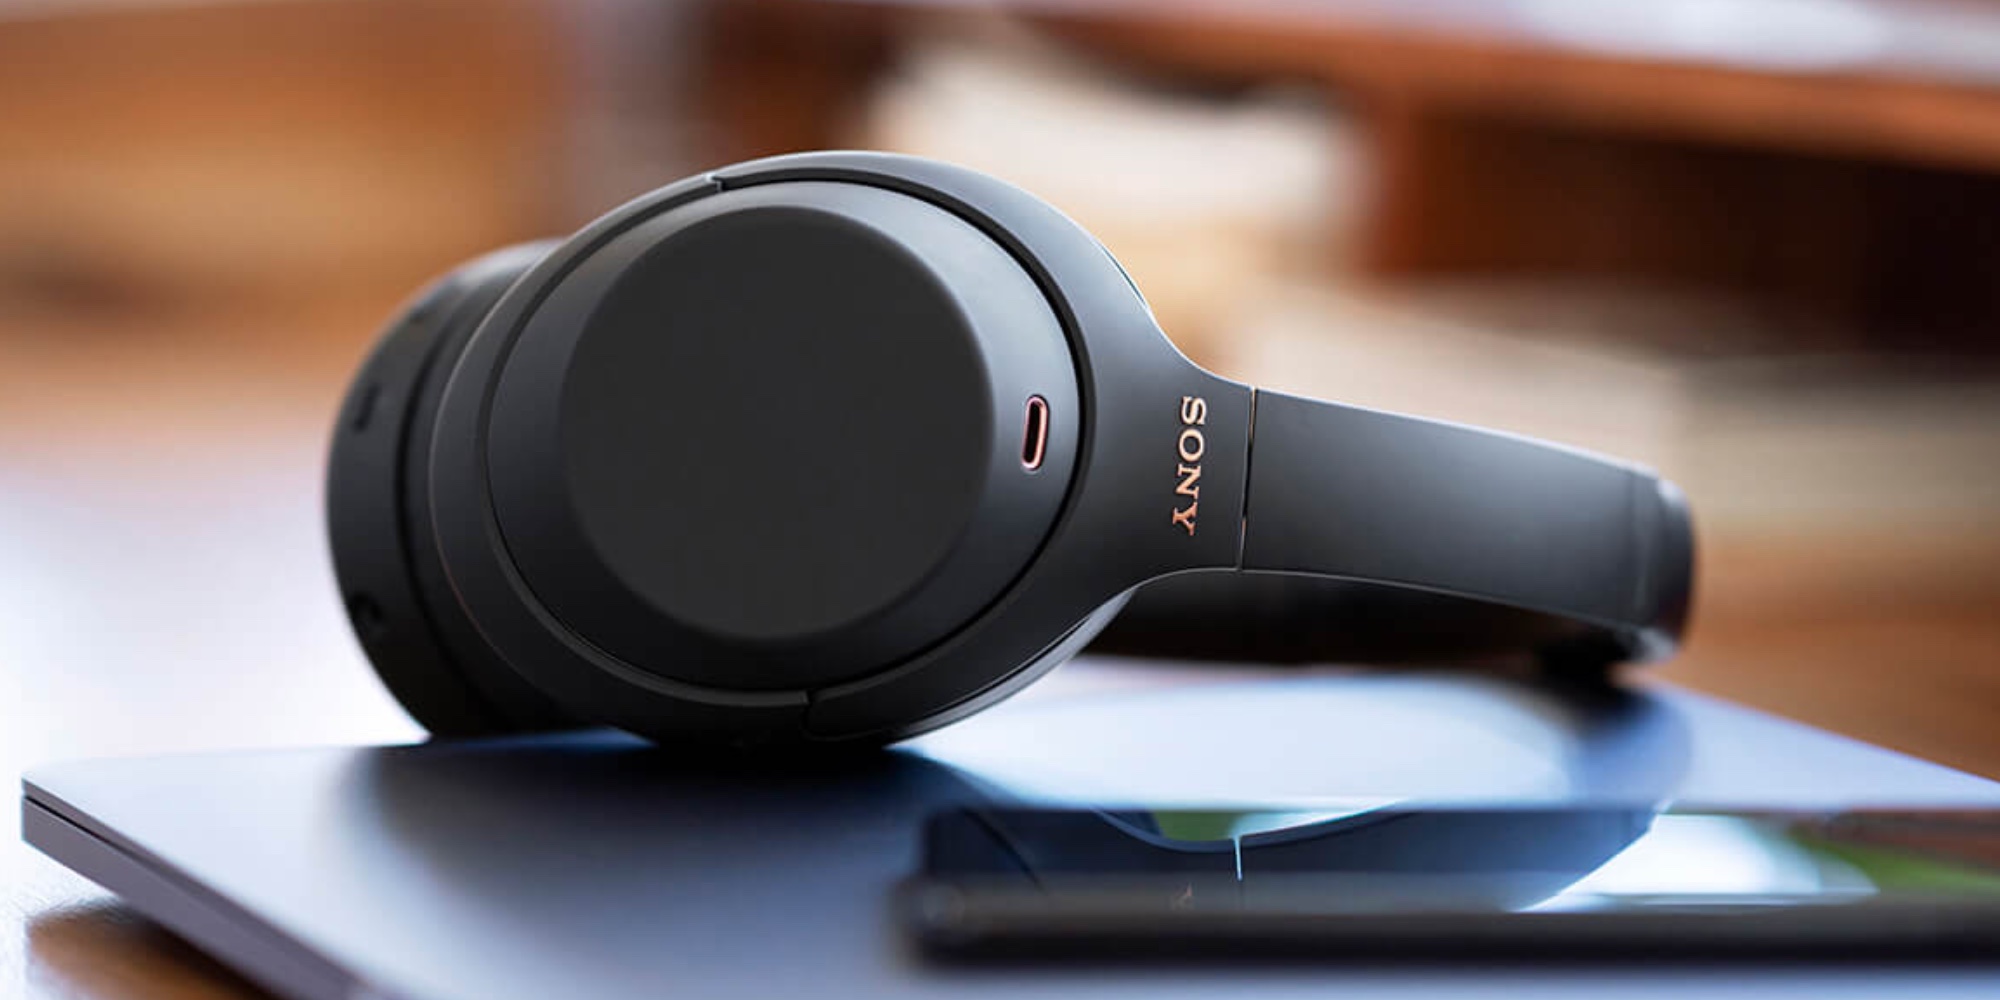 Sony's flagship XM4 noise-canceling headphones are close to $100